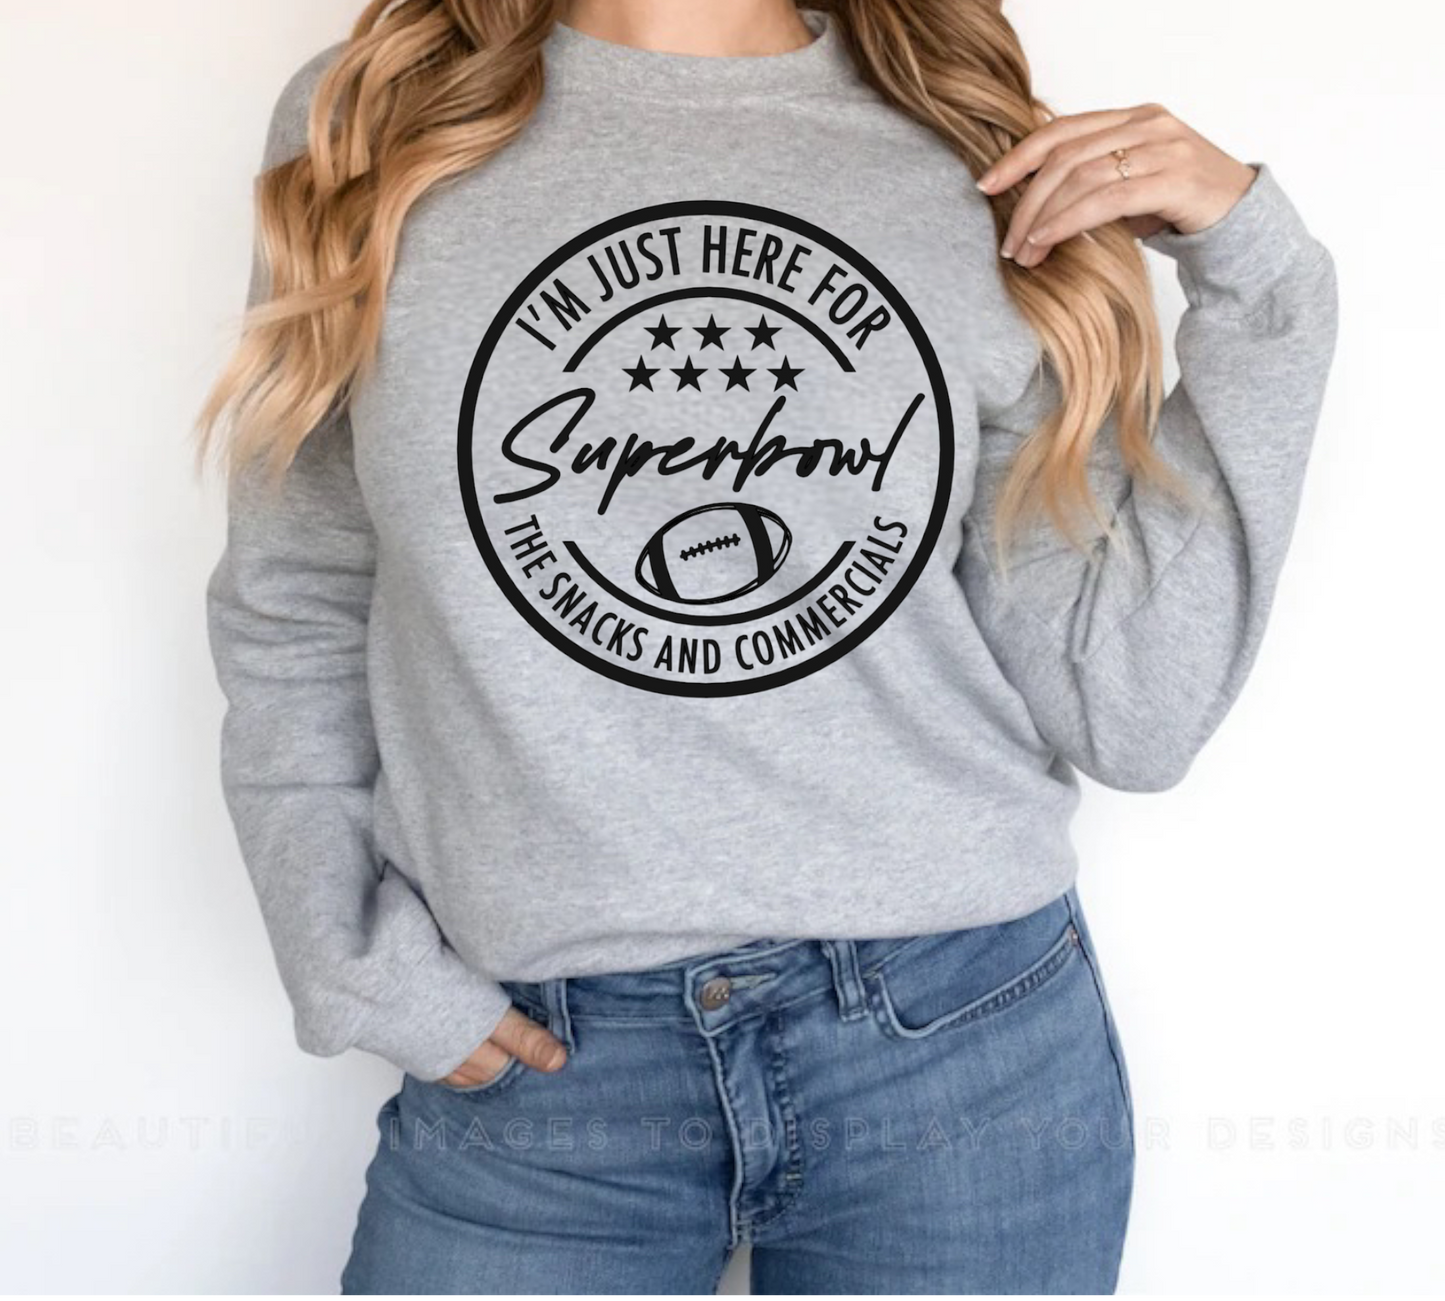 Here For the Snacks & Commercials Superbowl Crewneck Sweatshirt or Tee